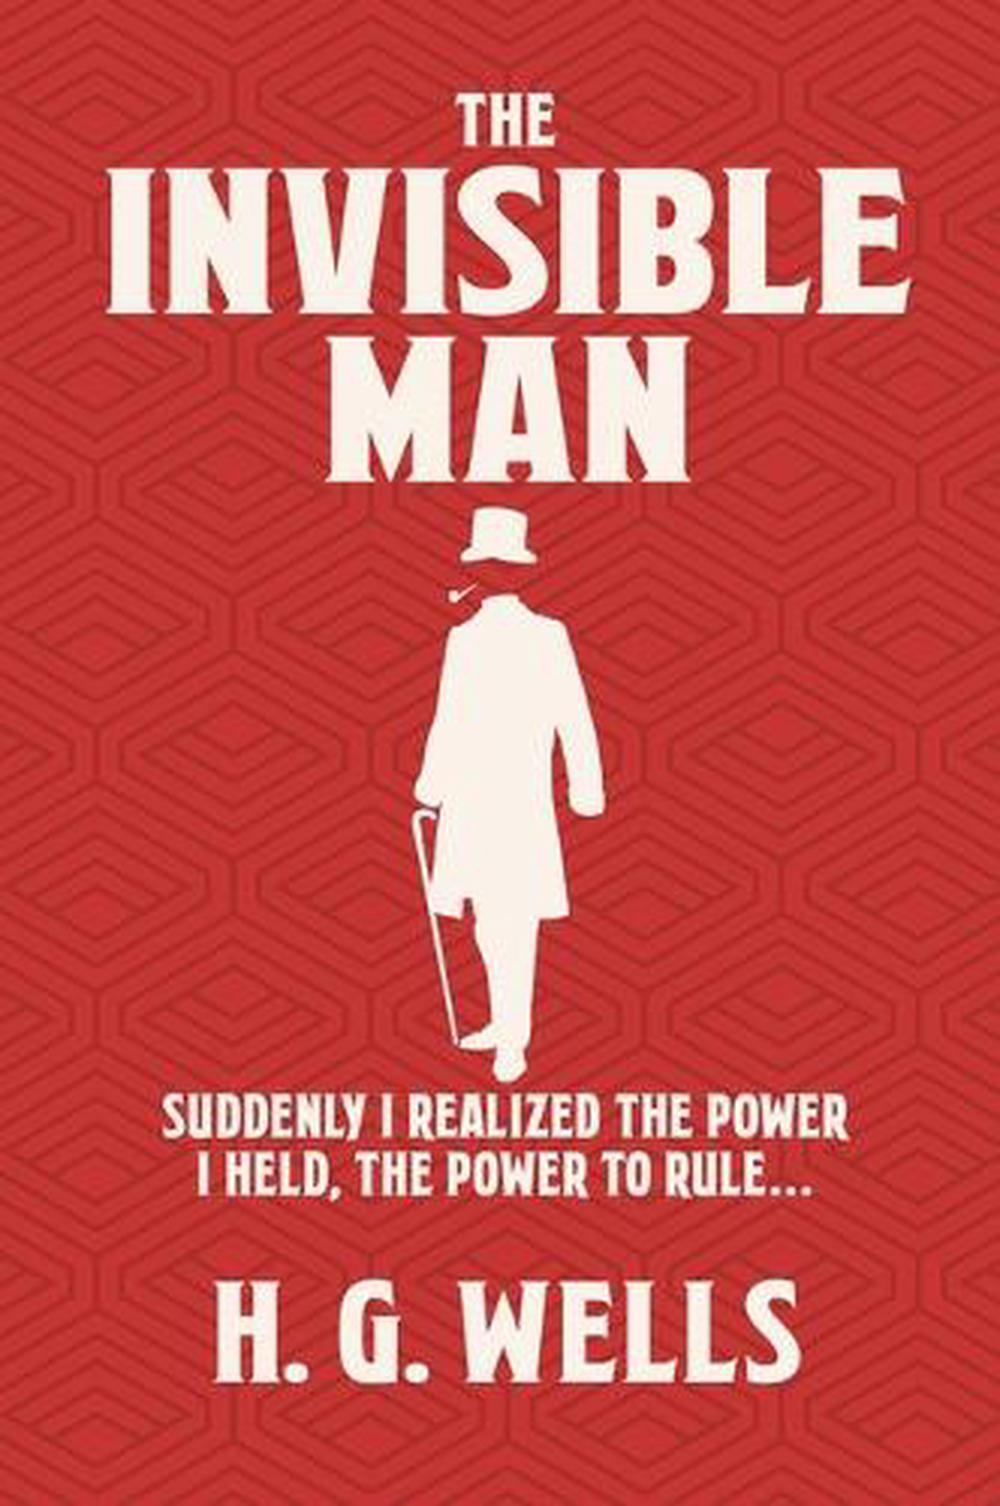 the invisible man by hg wells book